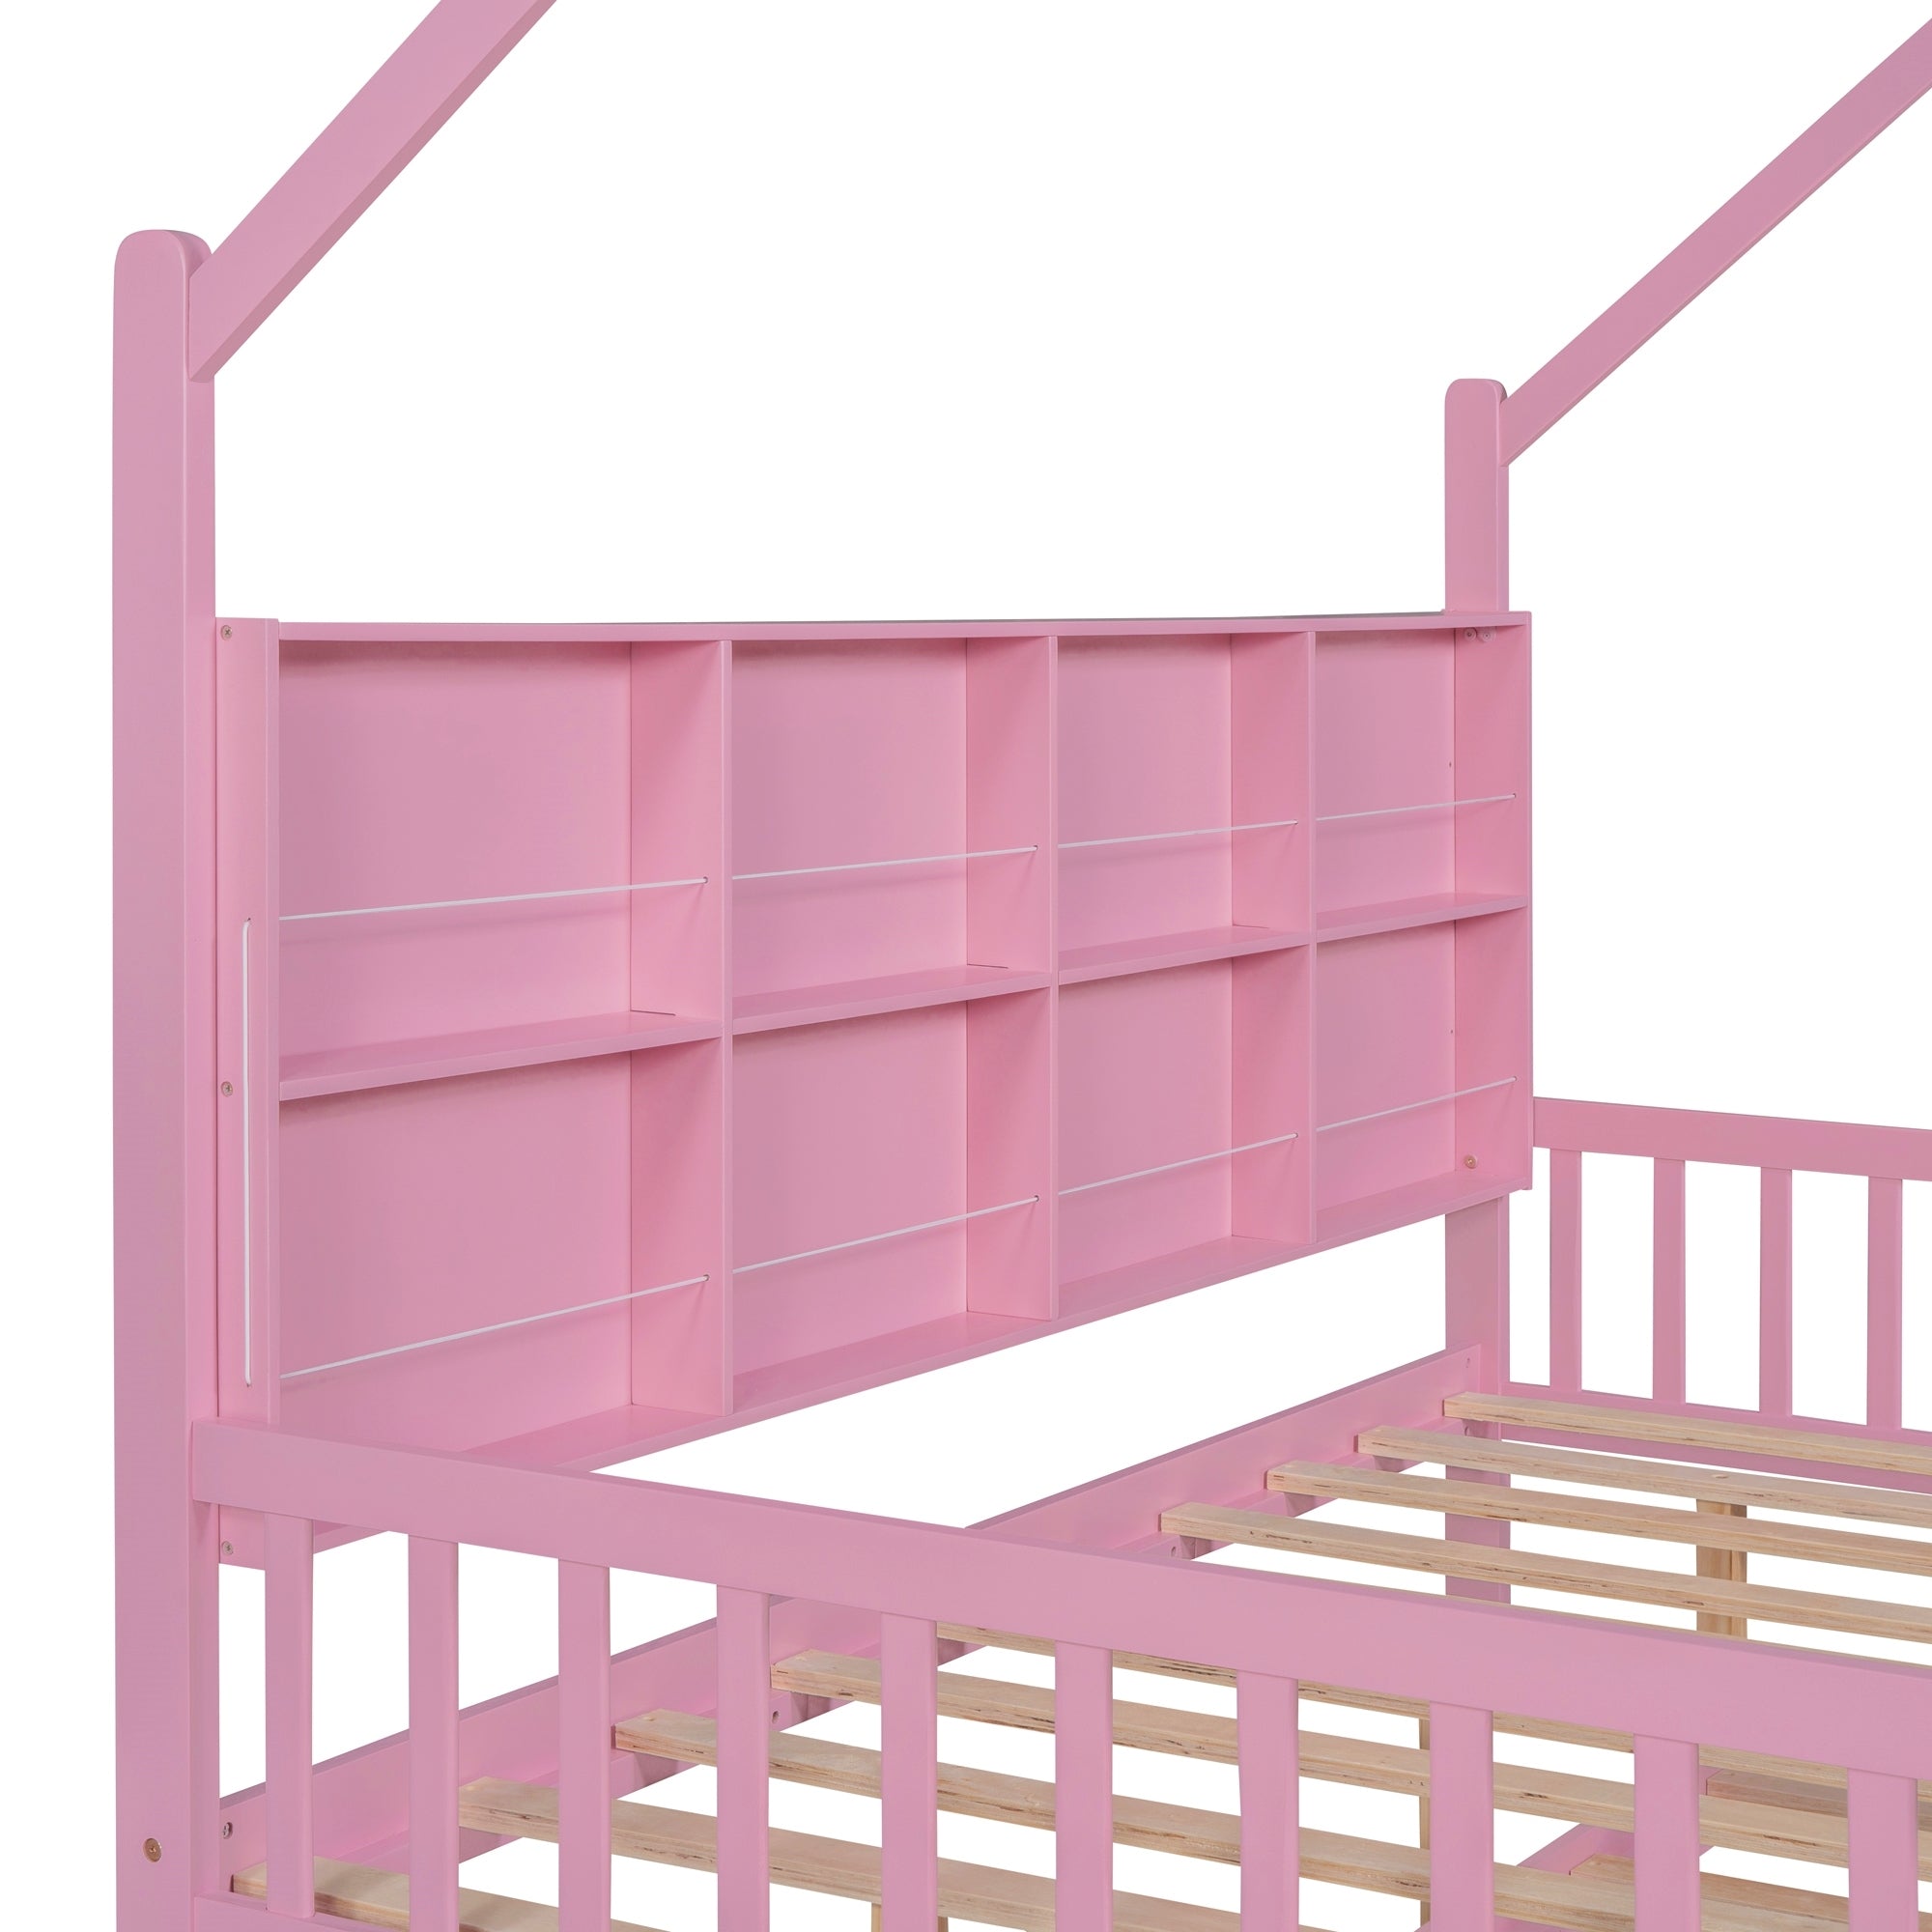 Wooden Full Size House Bed with Trundle,Kids Bed with pink-wood